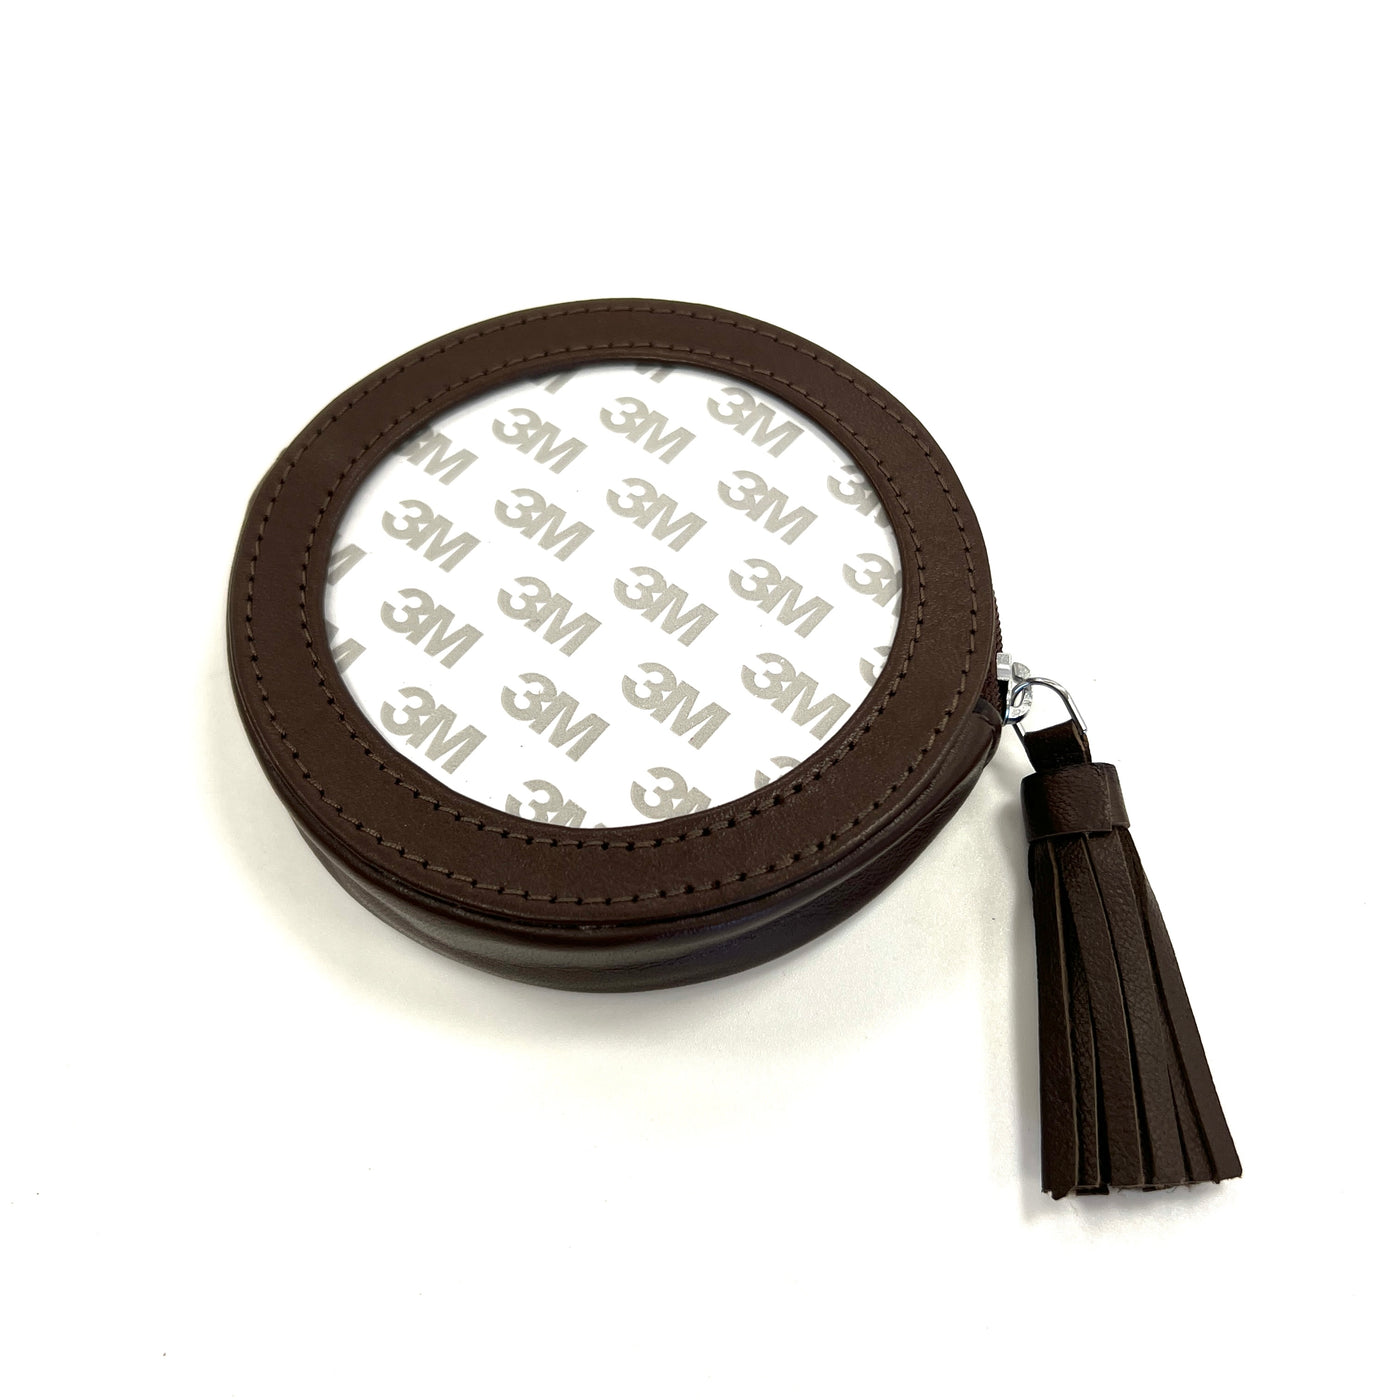 Leather Coin Rounds with Tasseled Zipper